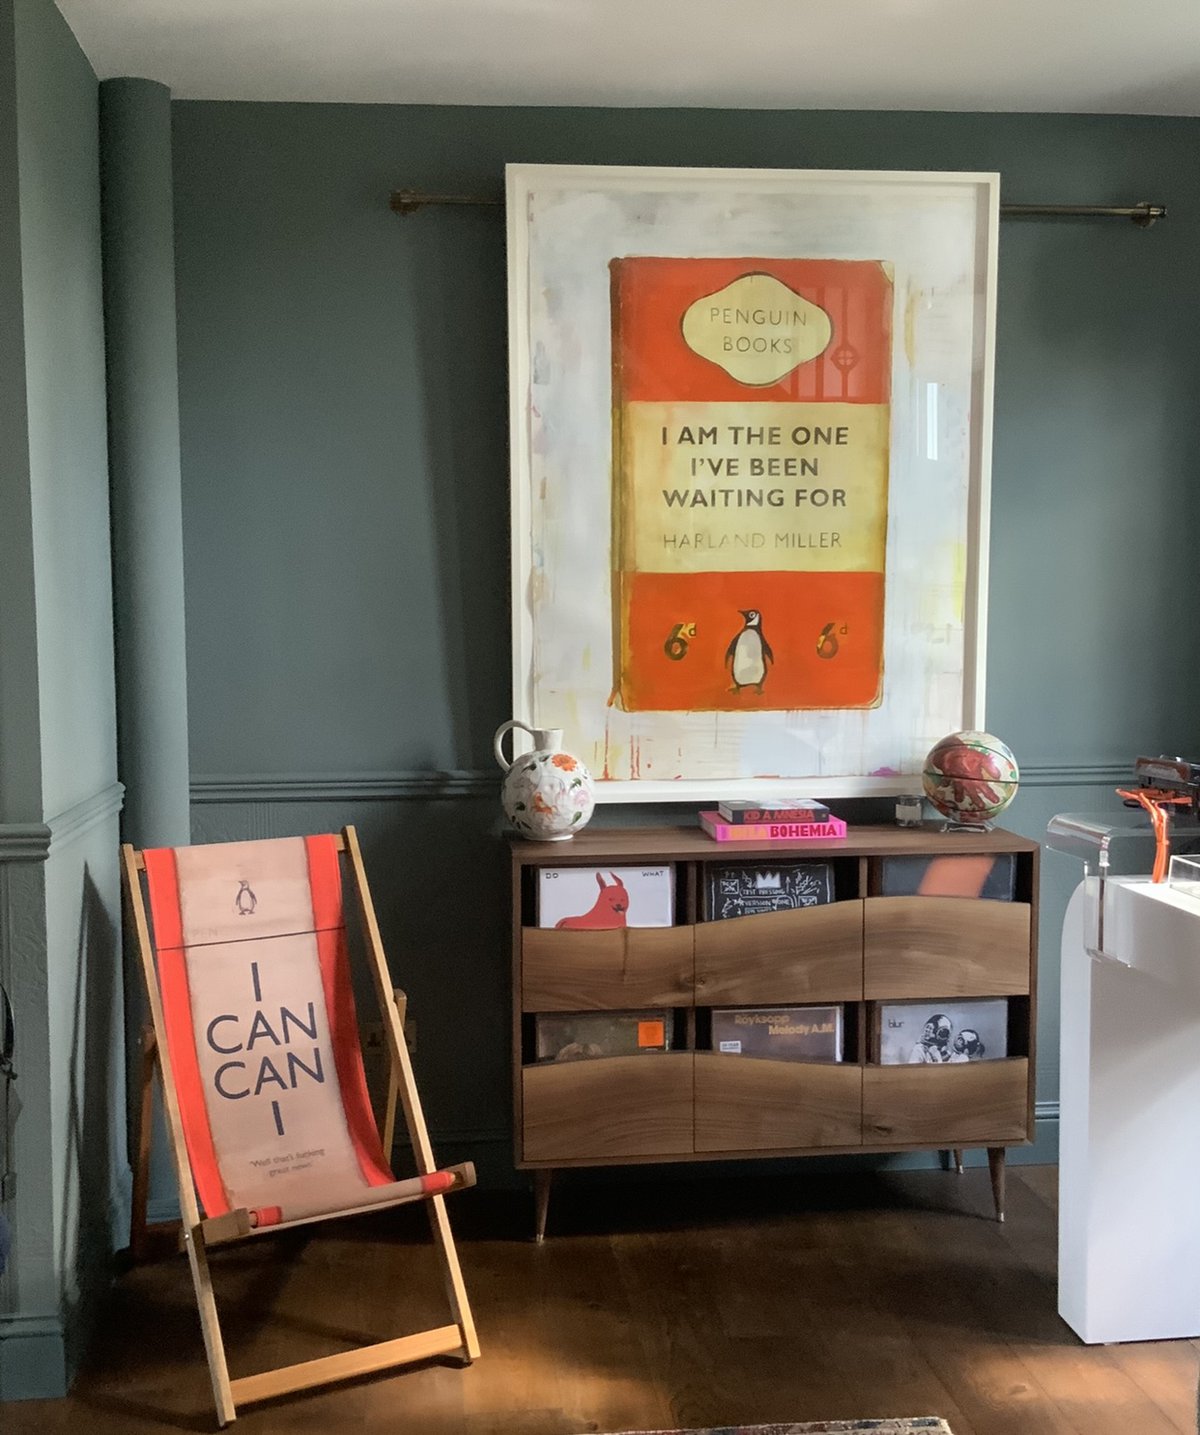 Works by Harland Miller in the Hollingworth CollectionCourtesy of the artist and the Hollingworth Collection